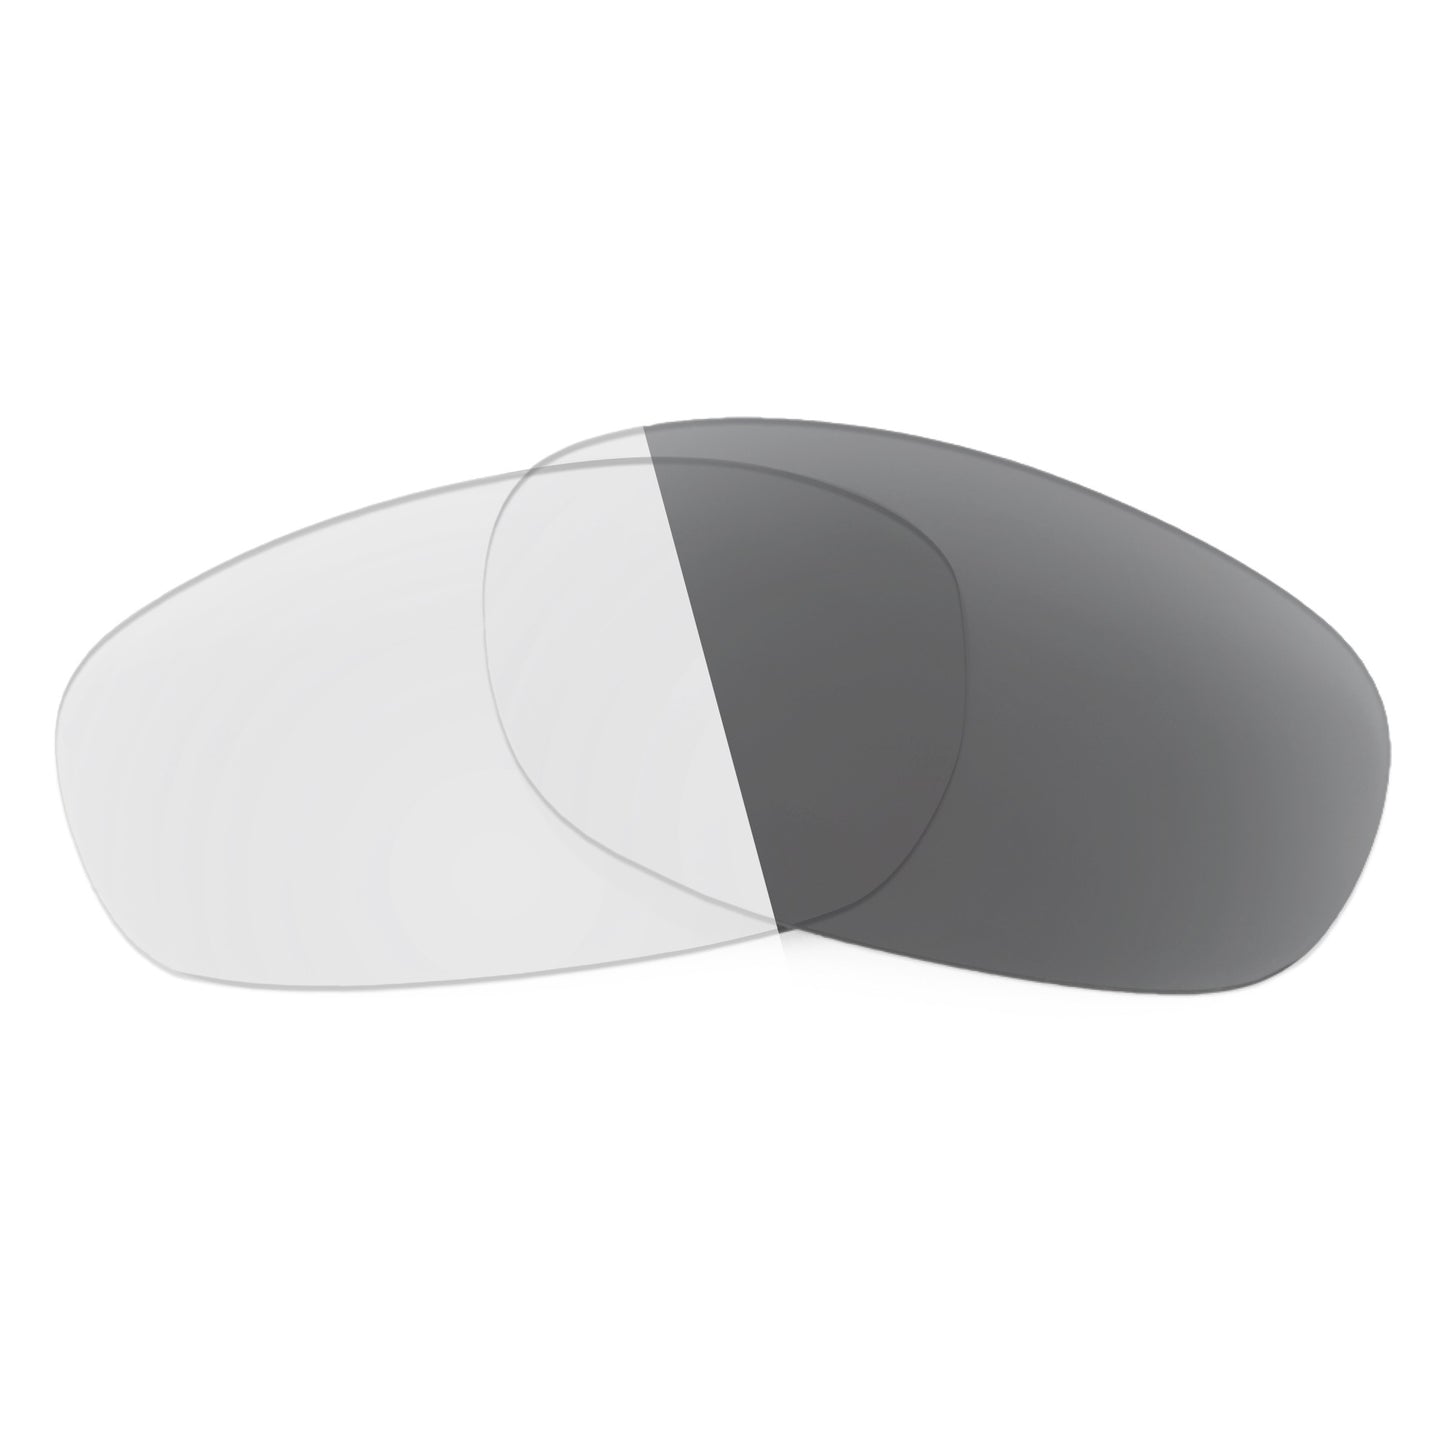 Revant replacement lenses for Ray-Ban RB3484 63mm Non-Polarized Adapt Gray Photochromic